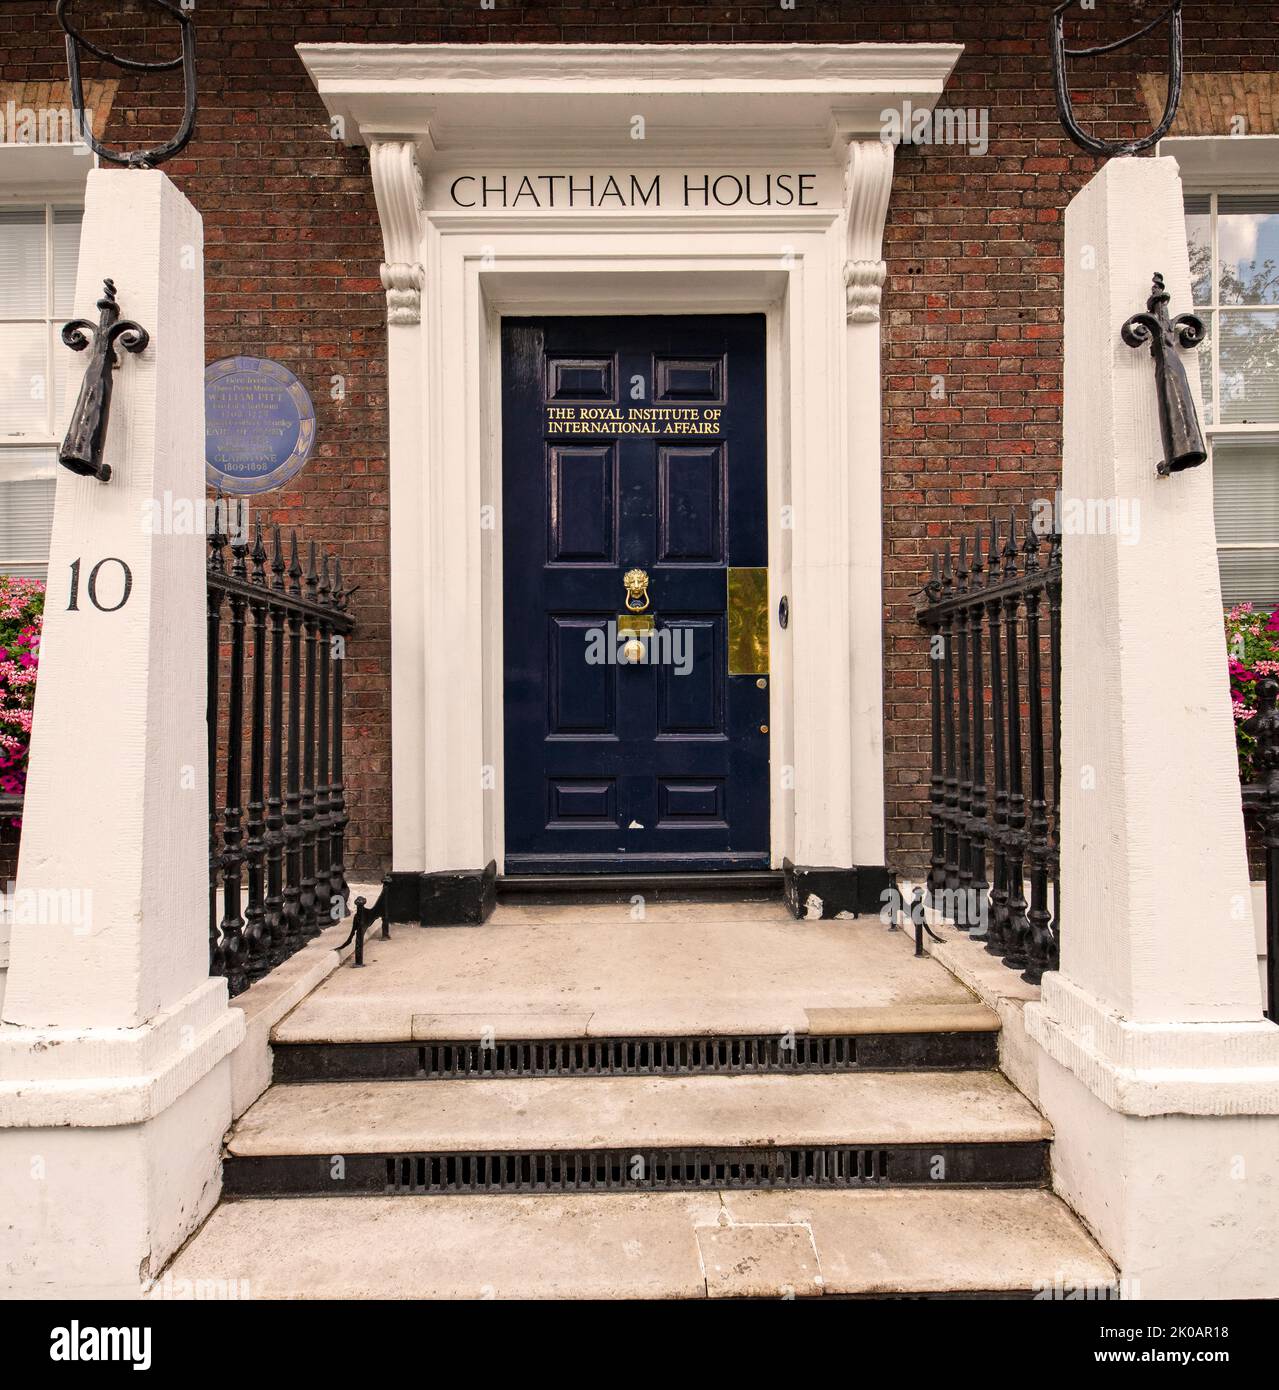 Chatham House (the Royal Institute of International Affairs), 10 St James's Square, London, a foreign affairs policy institute. Stock Photo